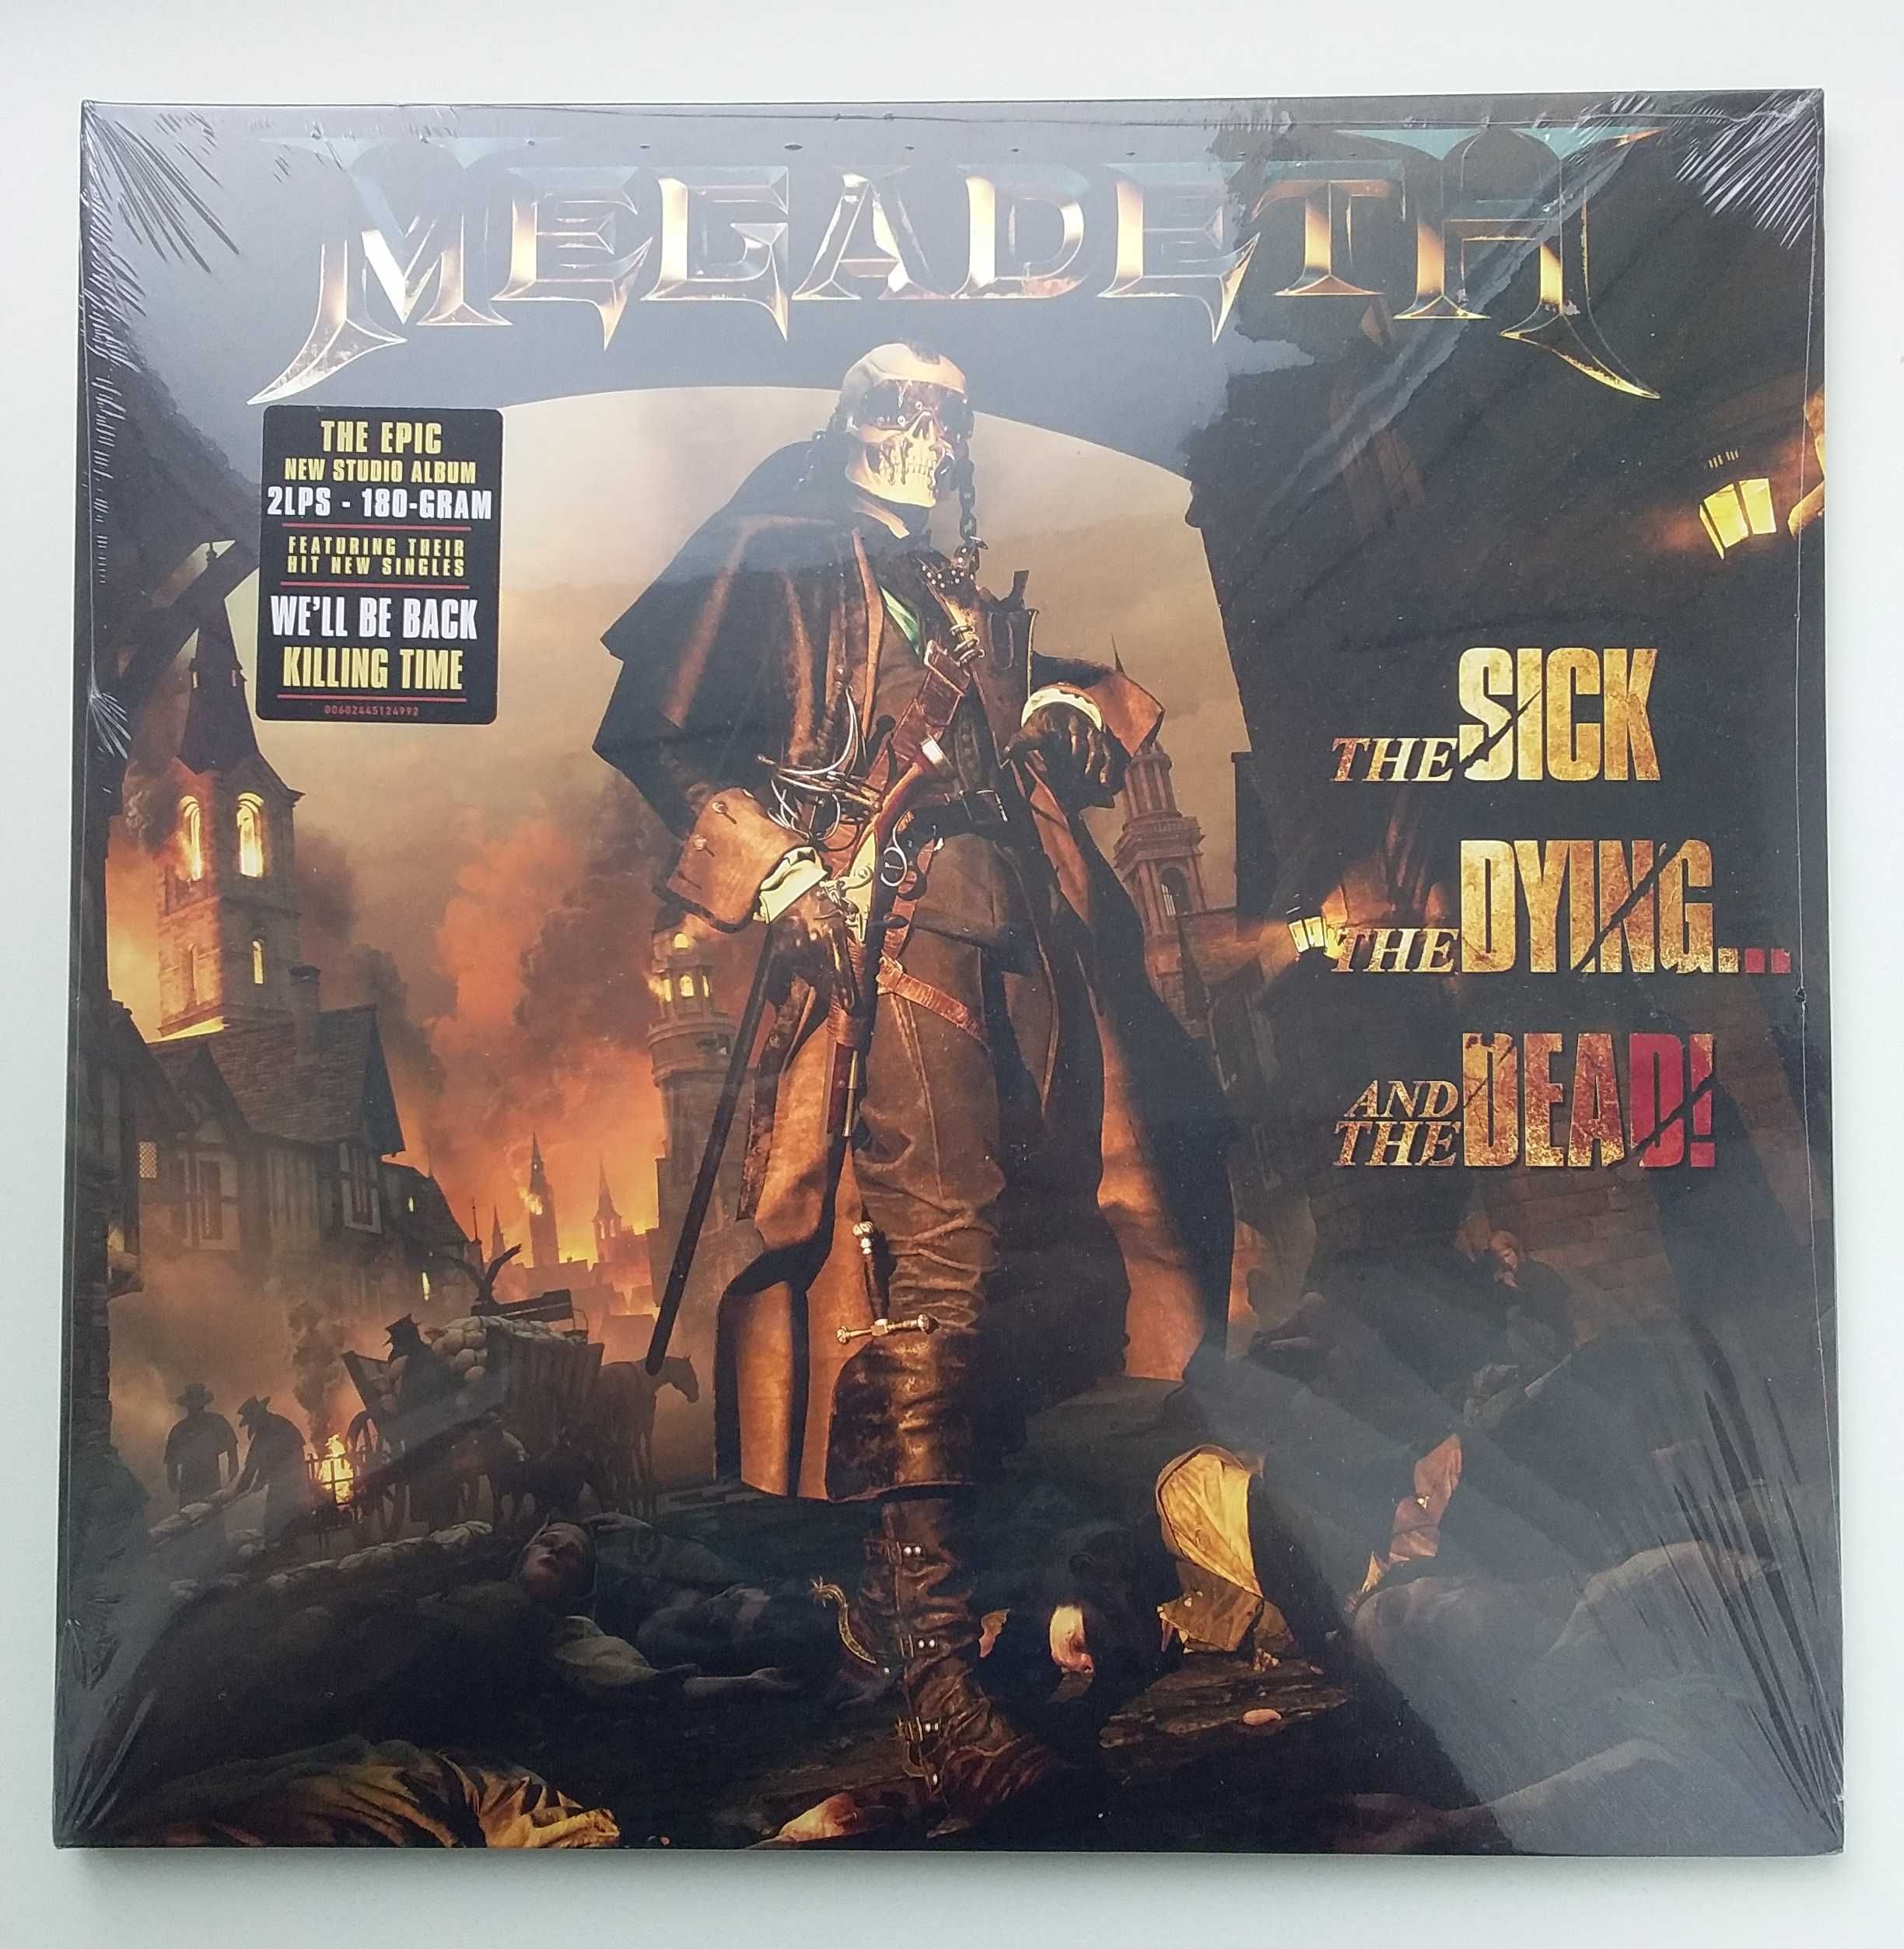 Винил Megadeth "The Sick, the Dying, and the Dead!"